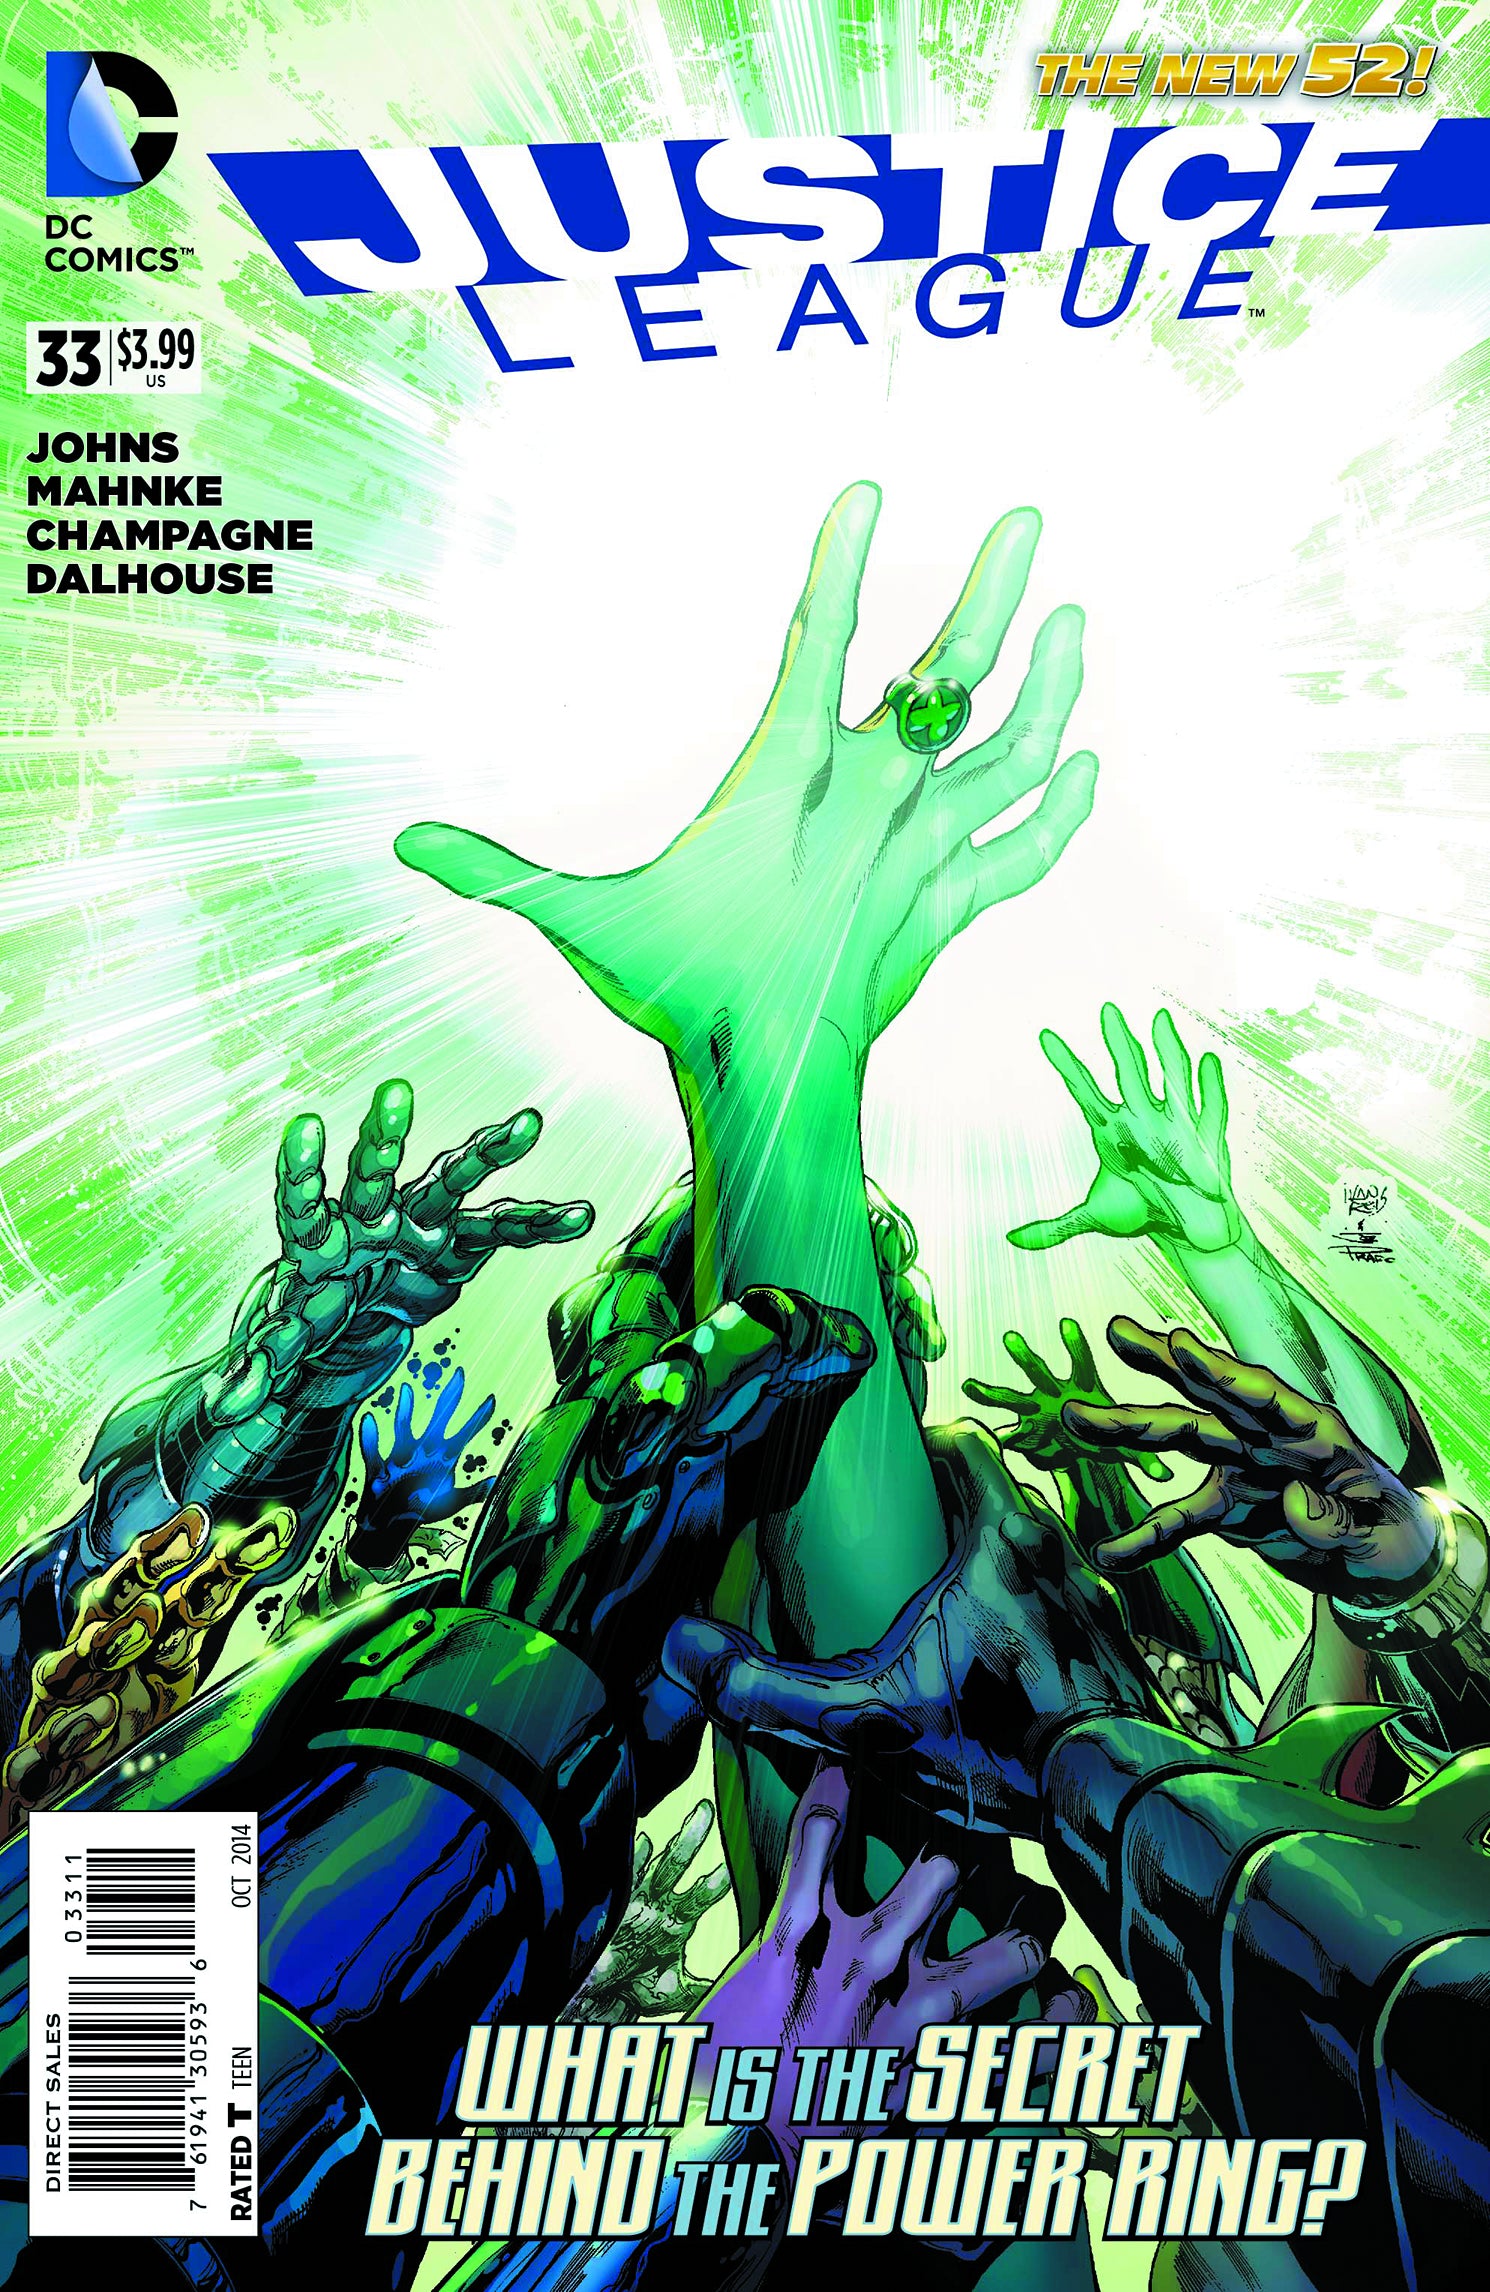 JUSTICE LEAGUE #33 | Game Master's Emporium (The New GME)